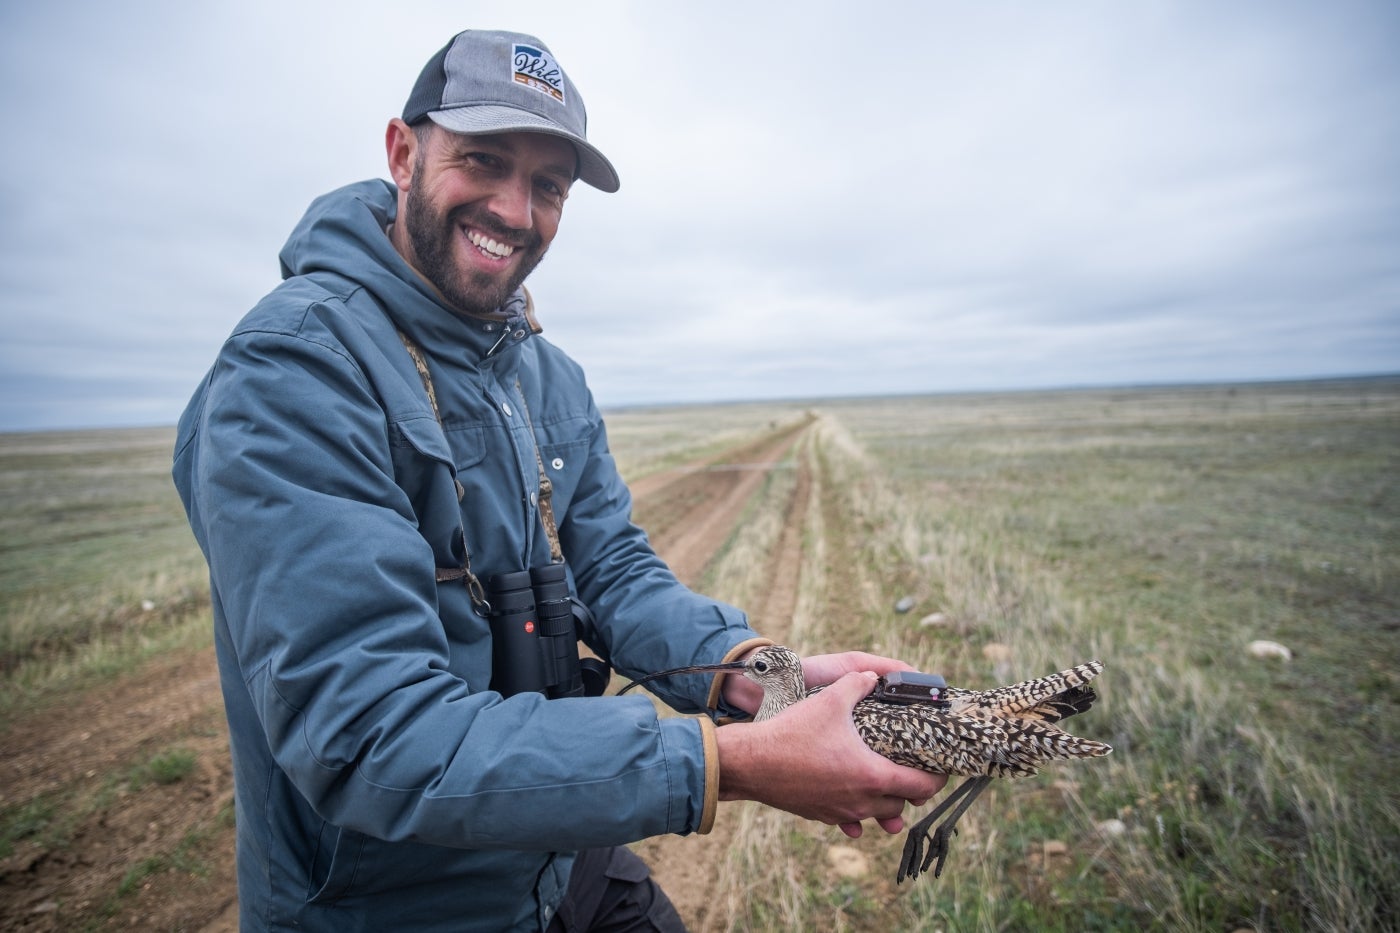 Ecologist Andy Boyce holds a long-billed curlew (a type of shorebird) that has been fitted with a GPS backpack at American Prairie Reserve in Montana